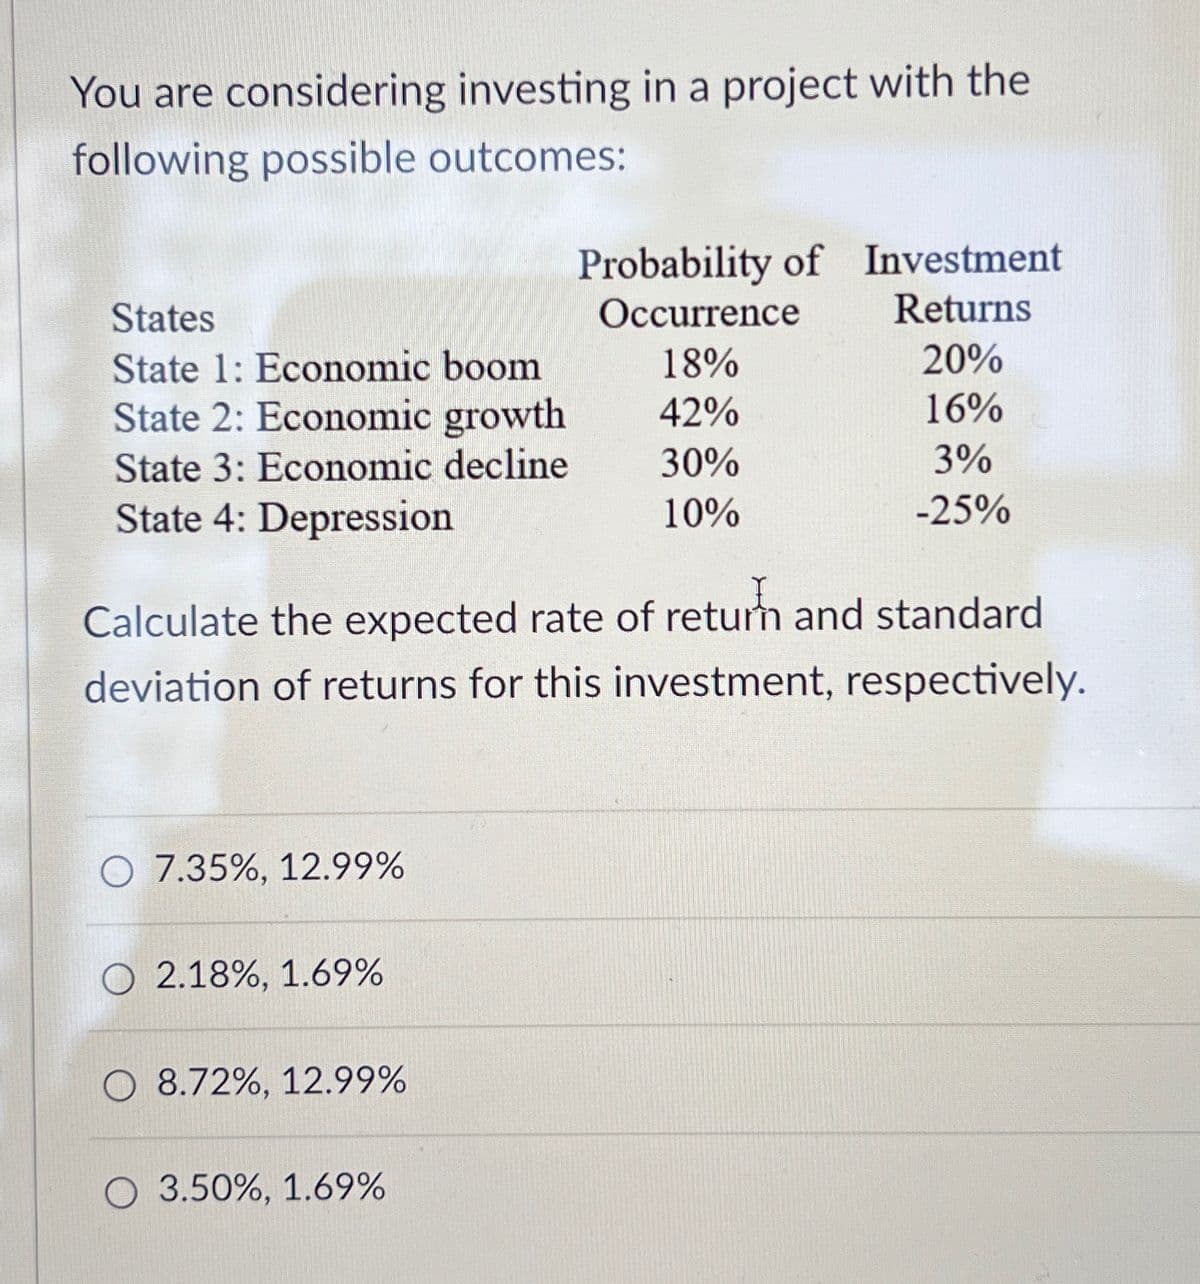 You are considering investing in a project with the
following possible outcomes:
Probability of Investment
States
Occurrence
Returns
State 1: Economic boom
18%
20%
State 2: Economic growth
42%
16%
State 3: Economic decline
30%
3%
State 4: Depression
10%
-25%
Calculate the expected rate of return and standard
deviation of returns for this investment, respectively.
O 7.35%, 12.99%
O2.18%, 1.69%
O 8.72%, 12.99%
O3.50%, 1.69%